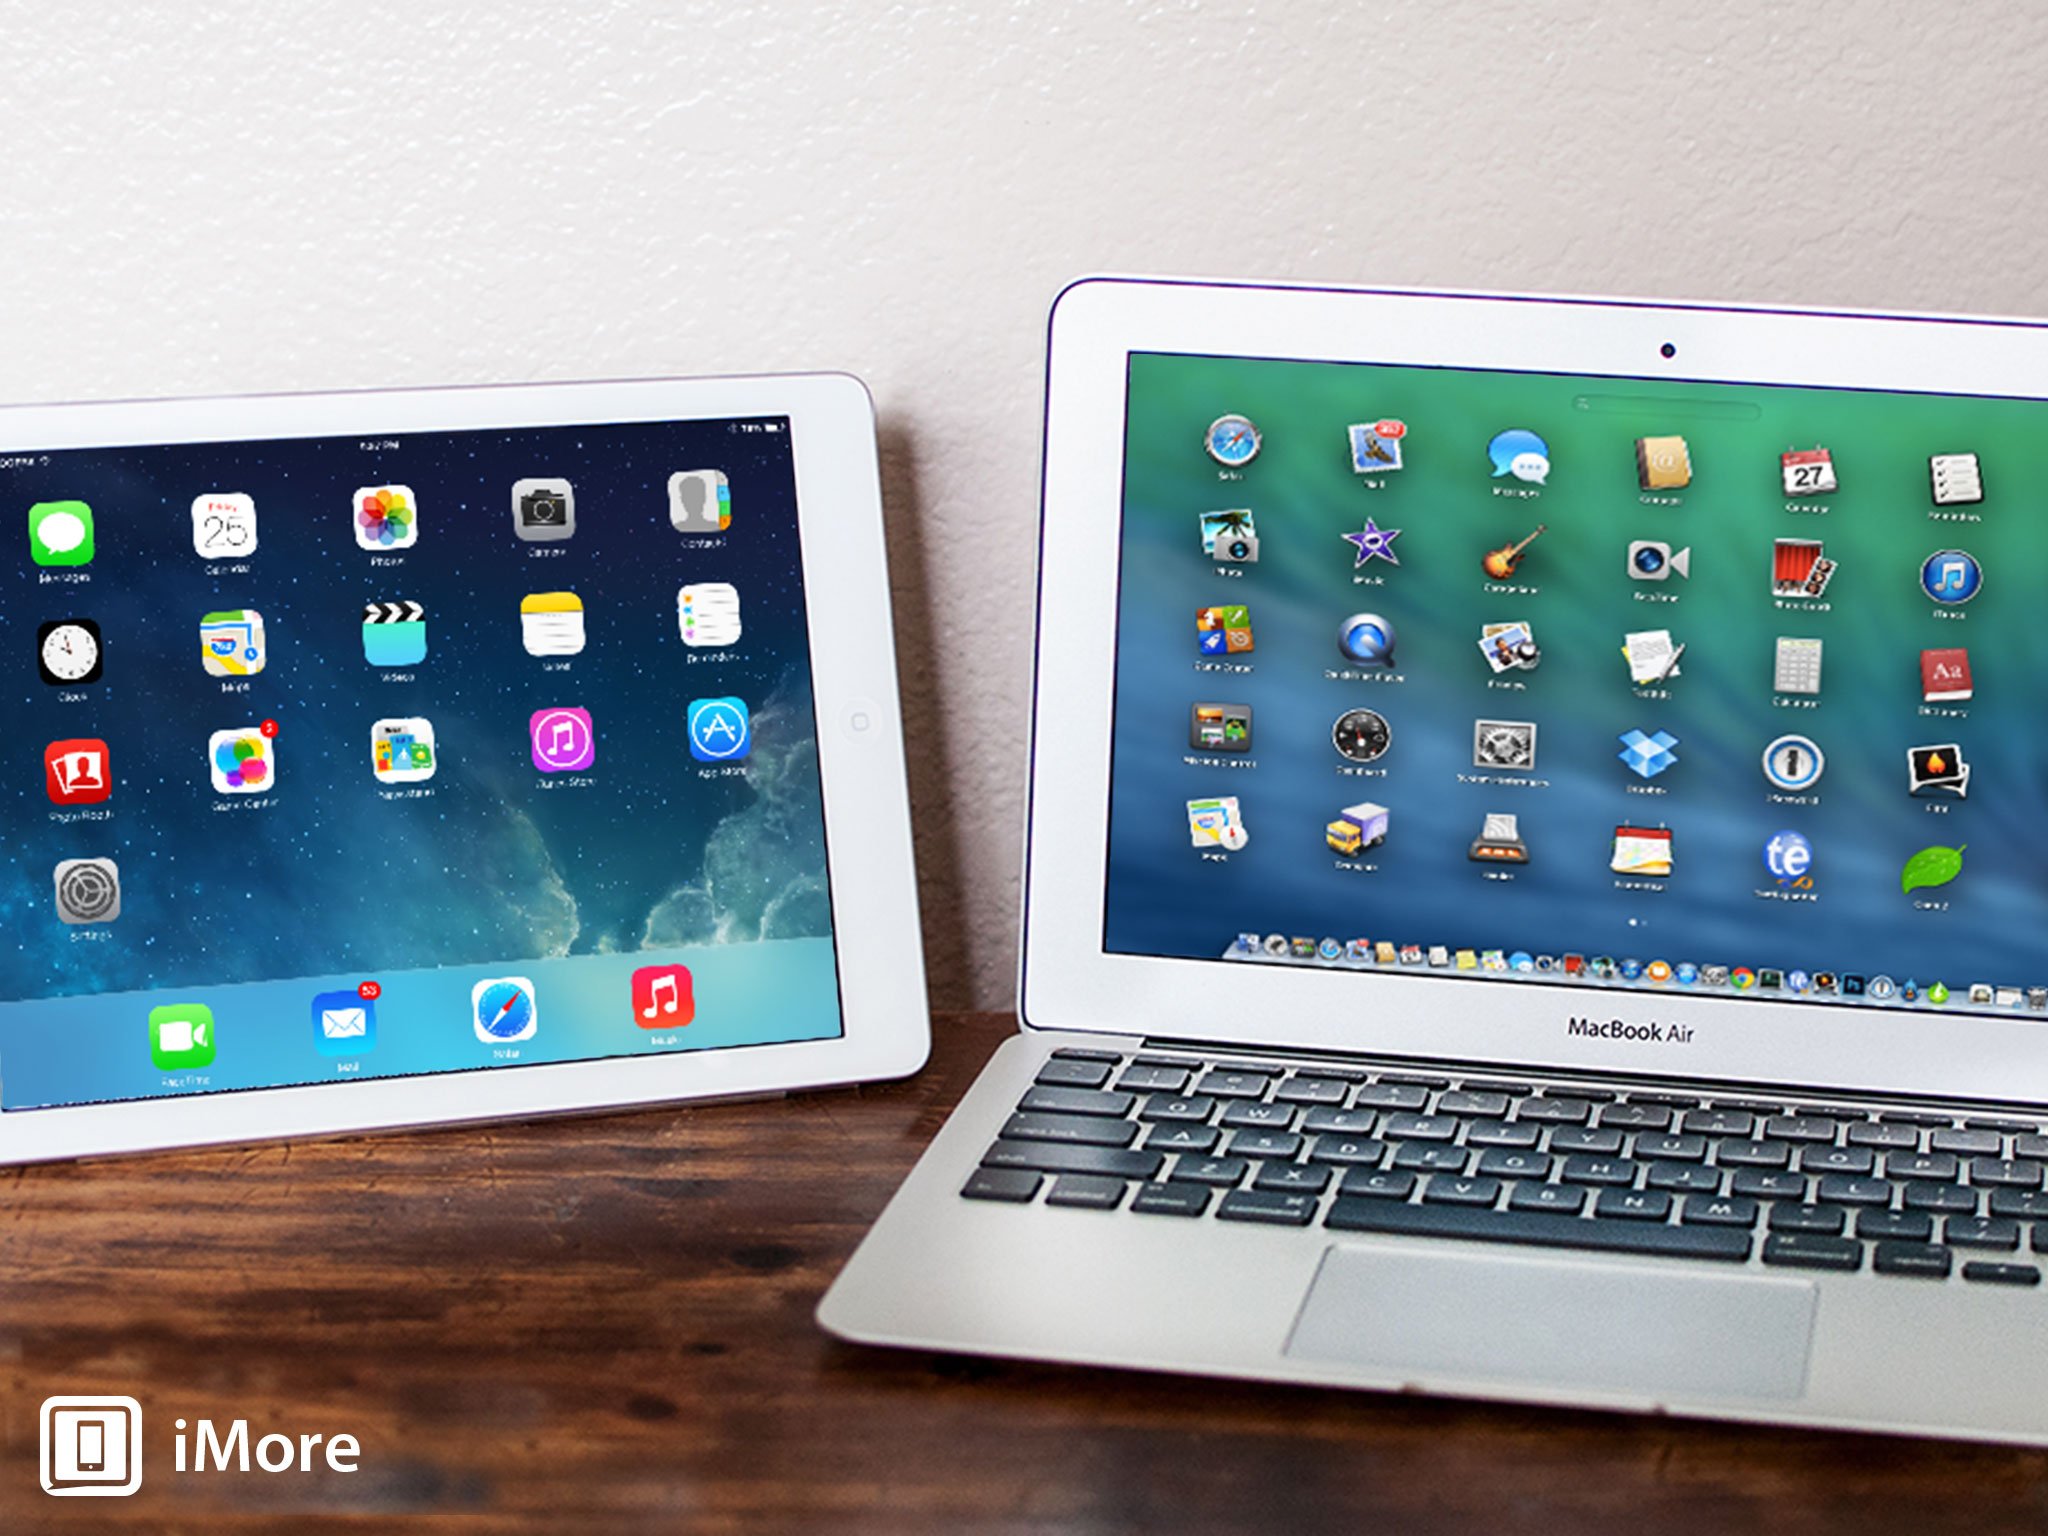 Yup, iPad Air still gets same insanely good 24-hours of battery life as Wi-Fi hotspot